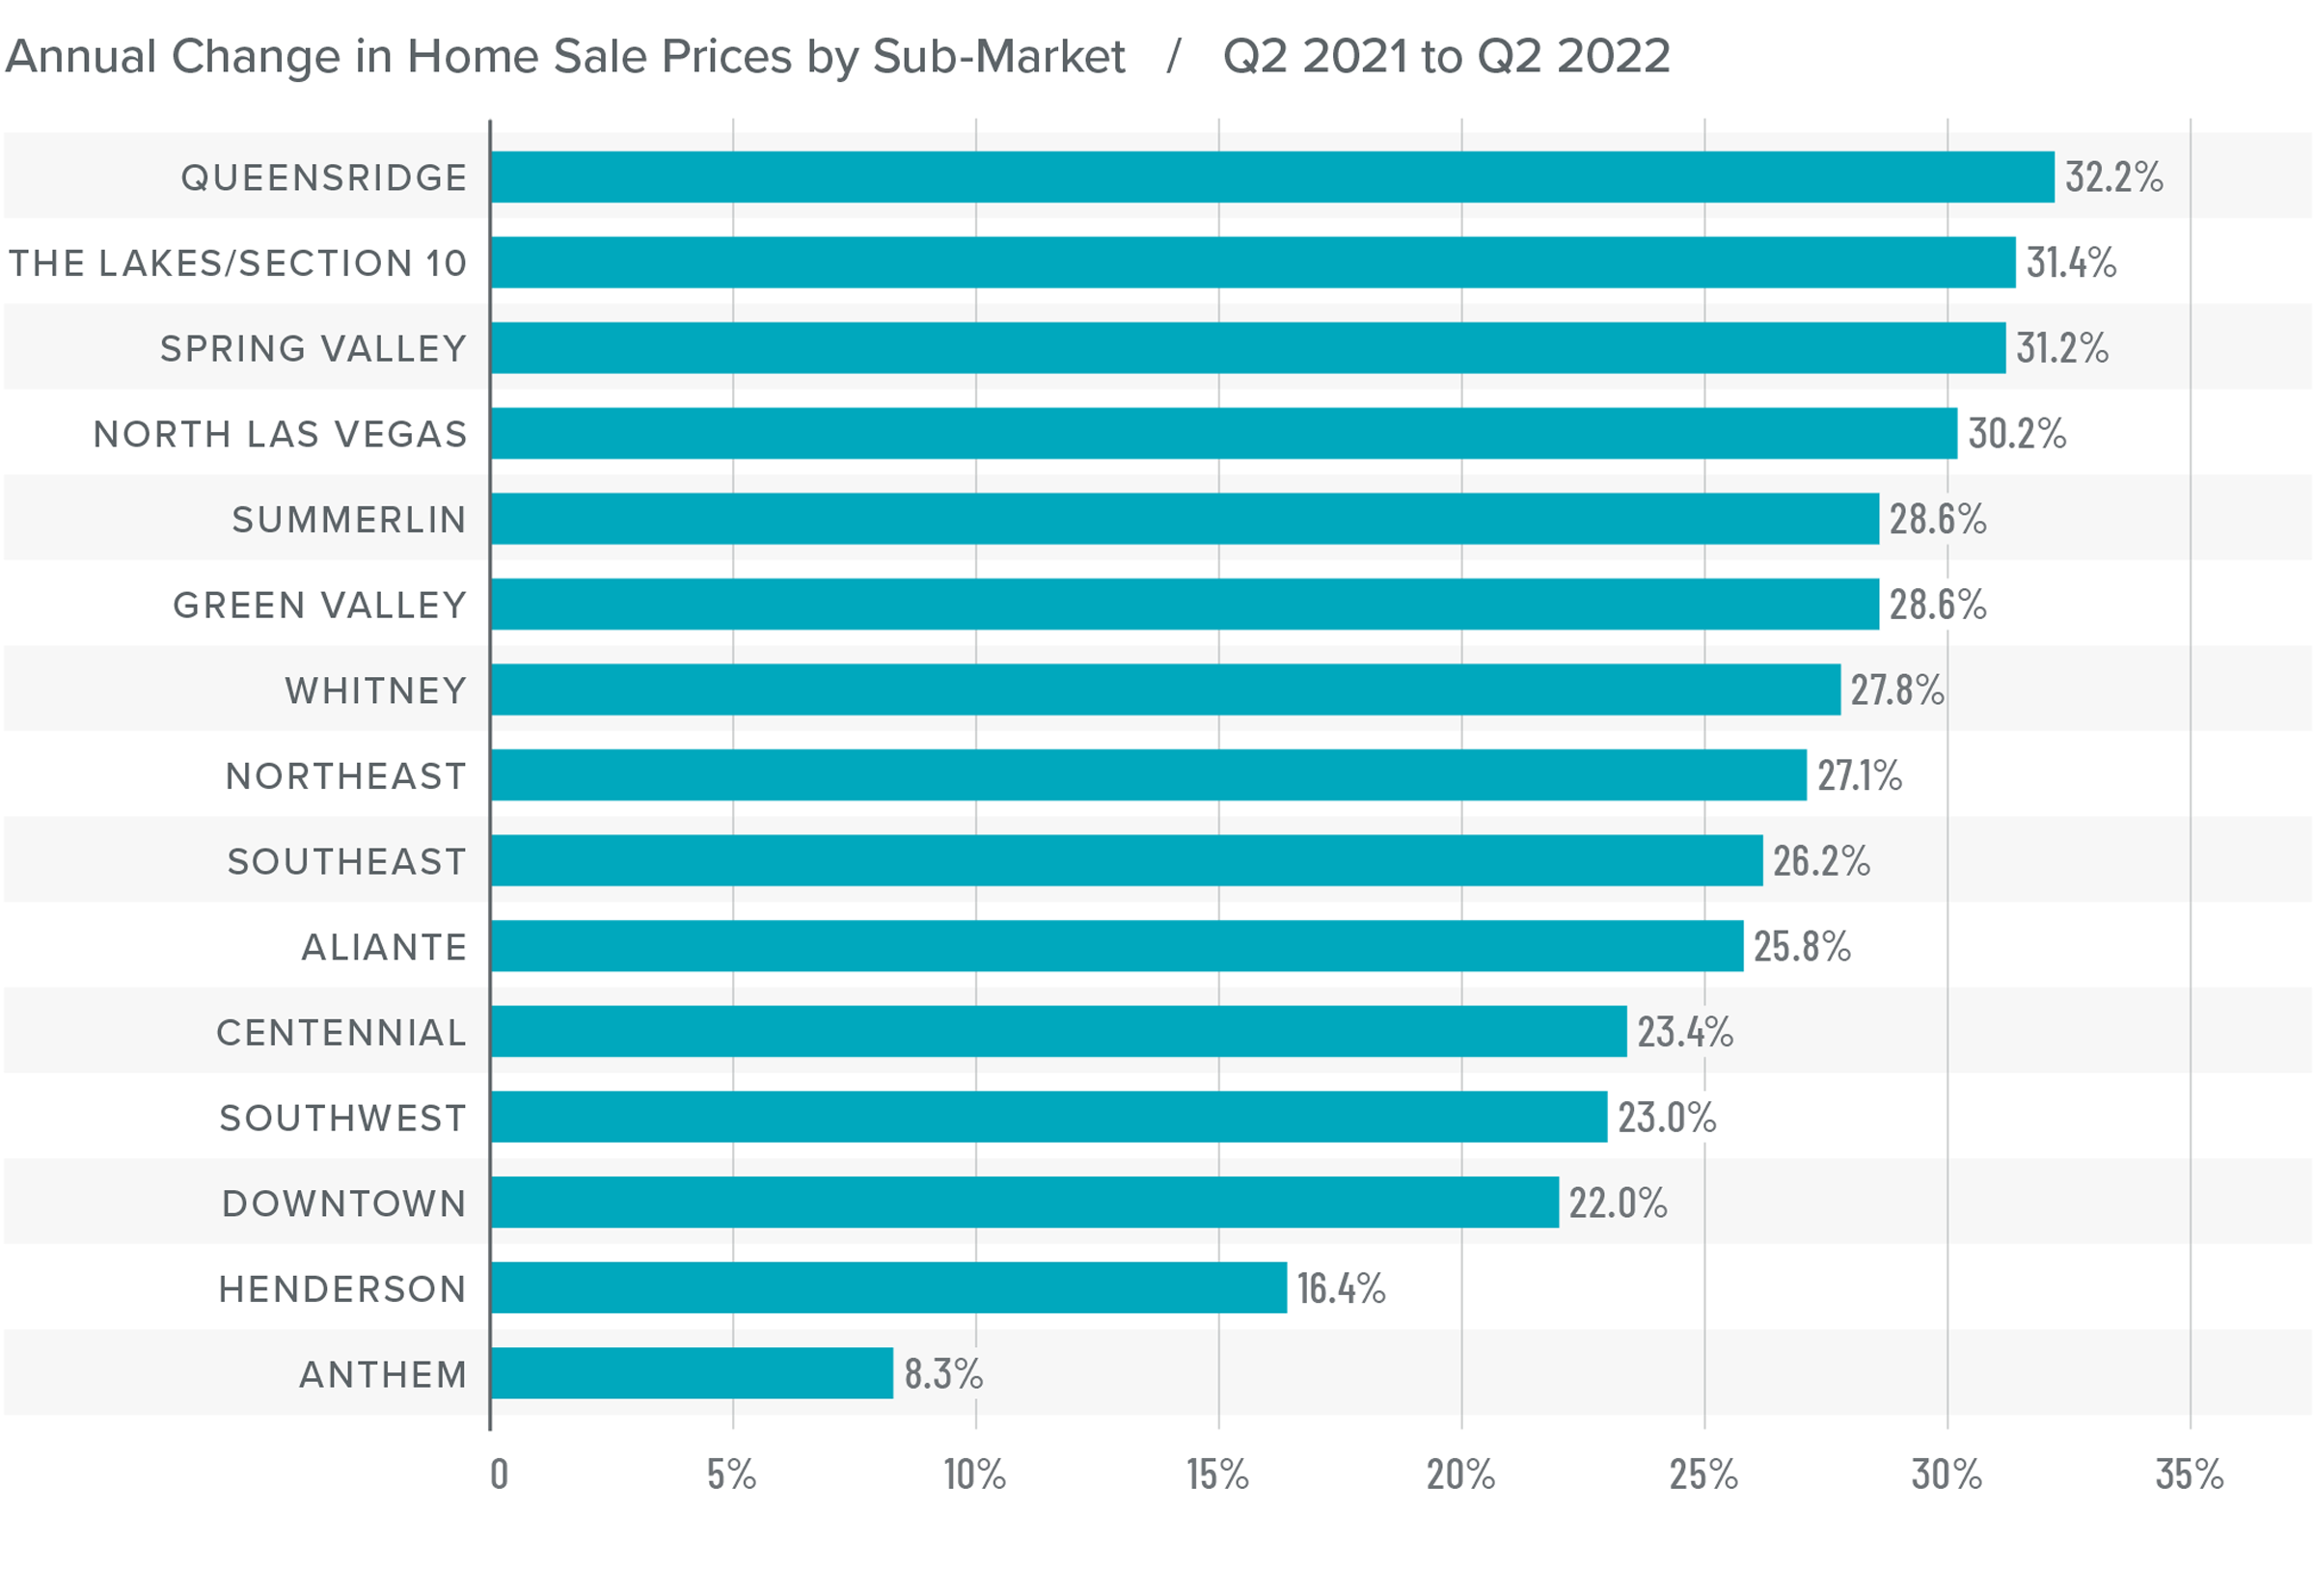 A bar graph showing the annual change in home sale prices for various sub-market areas in Greater Las Vegas from Q2 2021 to Q2 2022. Queensridge tops the list with a 32.2% change, followed by The Lakes / Section 10 at 31.4%, Spring Valley at 31.2%, North Las Vegas at 30.2%, Summerlin and Green Valley at 28.6%, Whitney at 27.8%, Northeast at 27.1%, Southeast at 26.2%, Aliante at 25.8%, Centennial at 23.4%, Southwest at 23%, Downtown at 22%, Henderson at 16.4%, and Anthem at 8.3%.